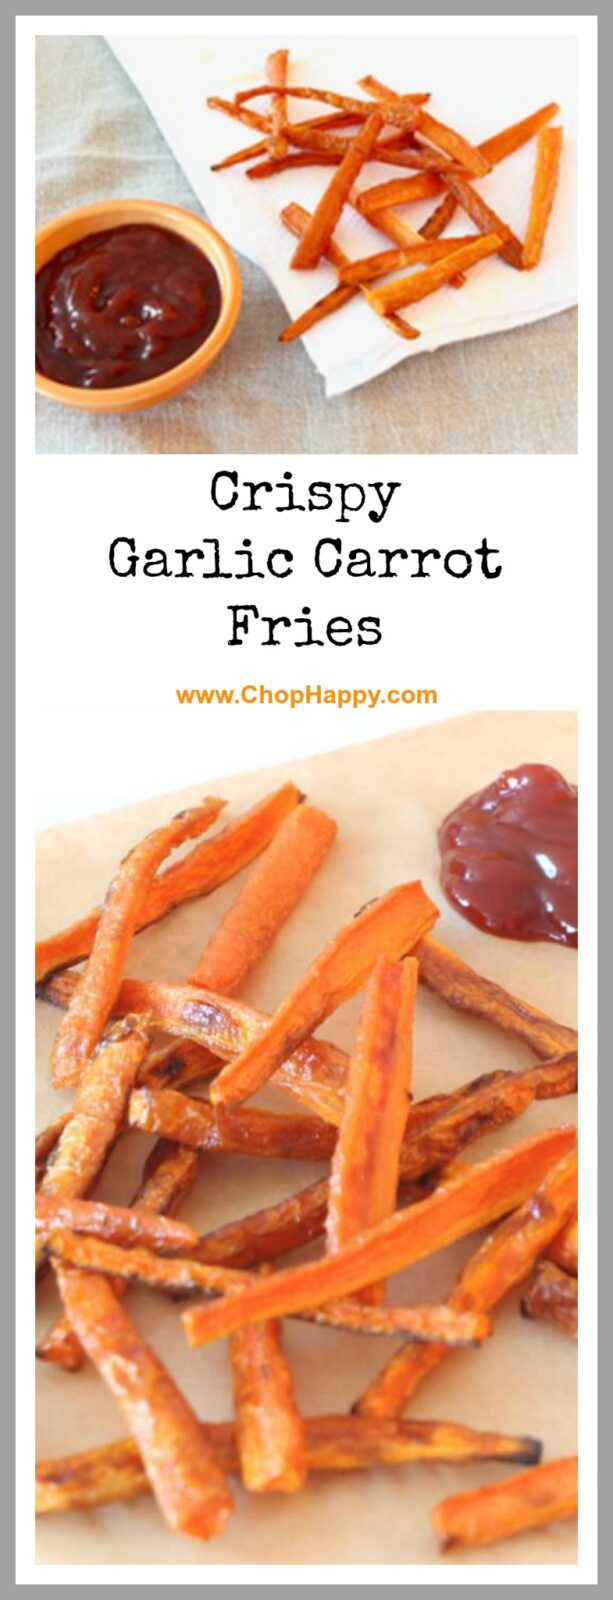 Crispy Garlic Carrot Fries Recipe - are sweet, crispy, and so comfort food satisfying. Grab carrots,  garlic, and olive oil. www.ChopHappy.com